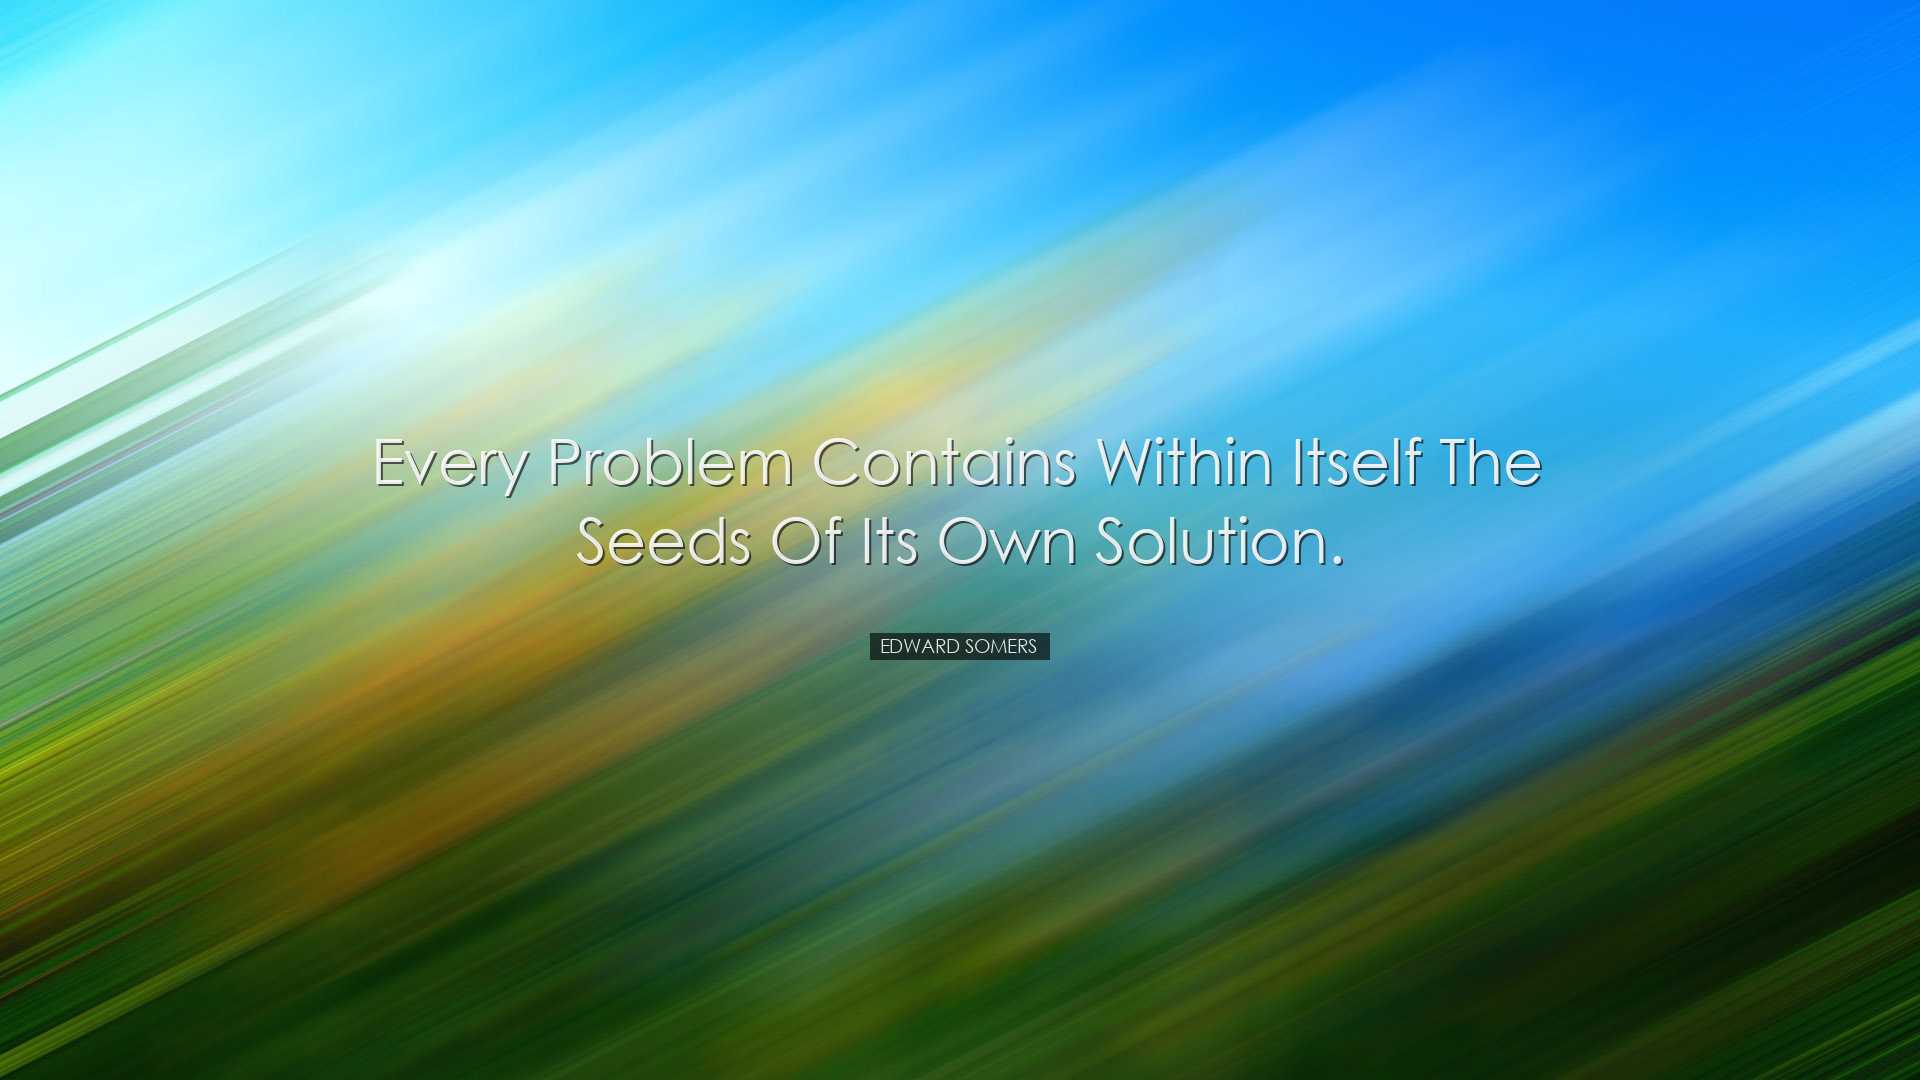 Every problem contains within itself the seeds of its own solution